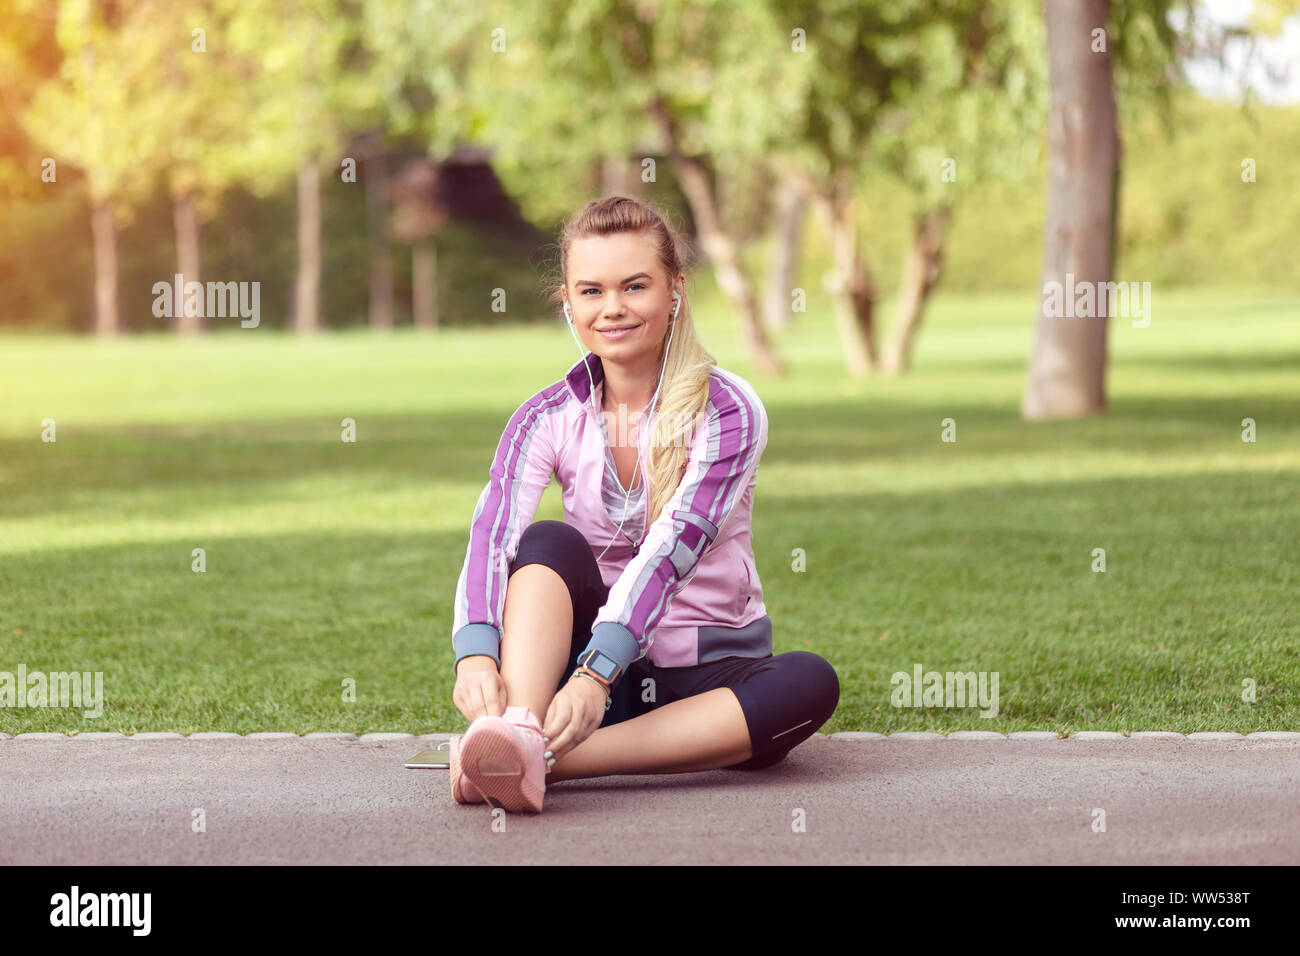 Mature fitness woman tie shoelaces in park Stock Photo